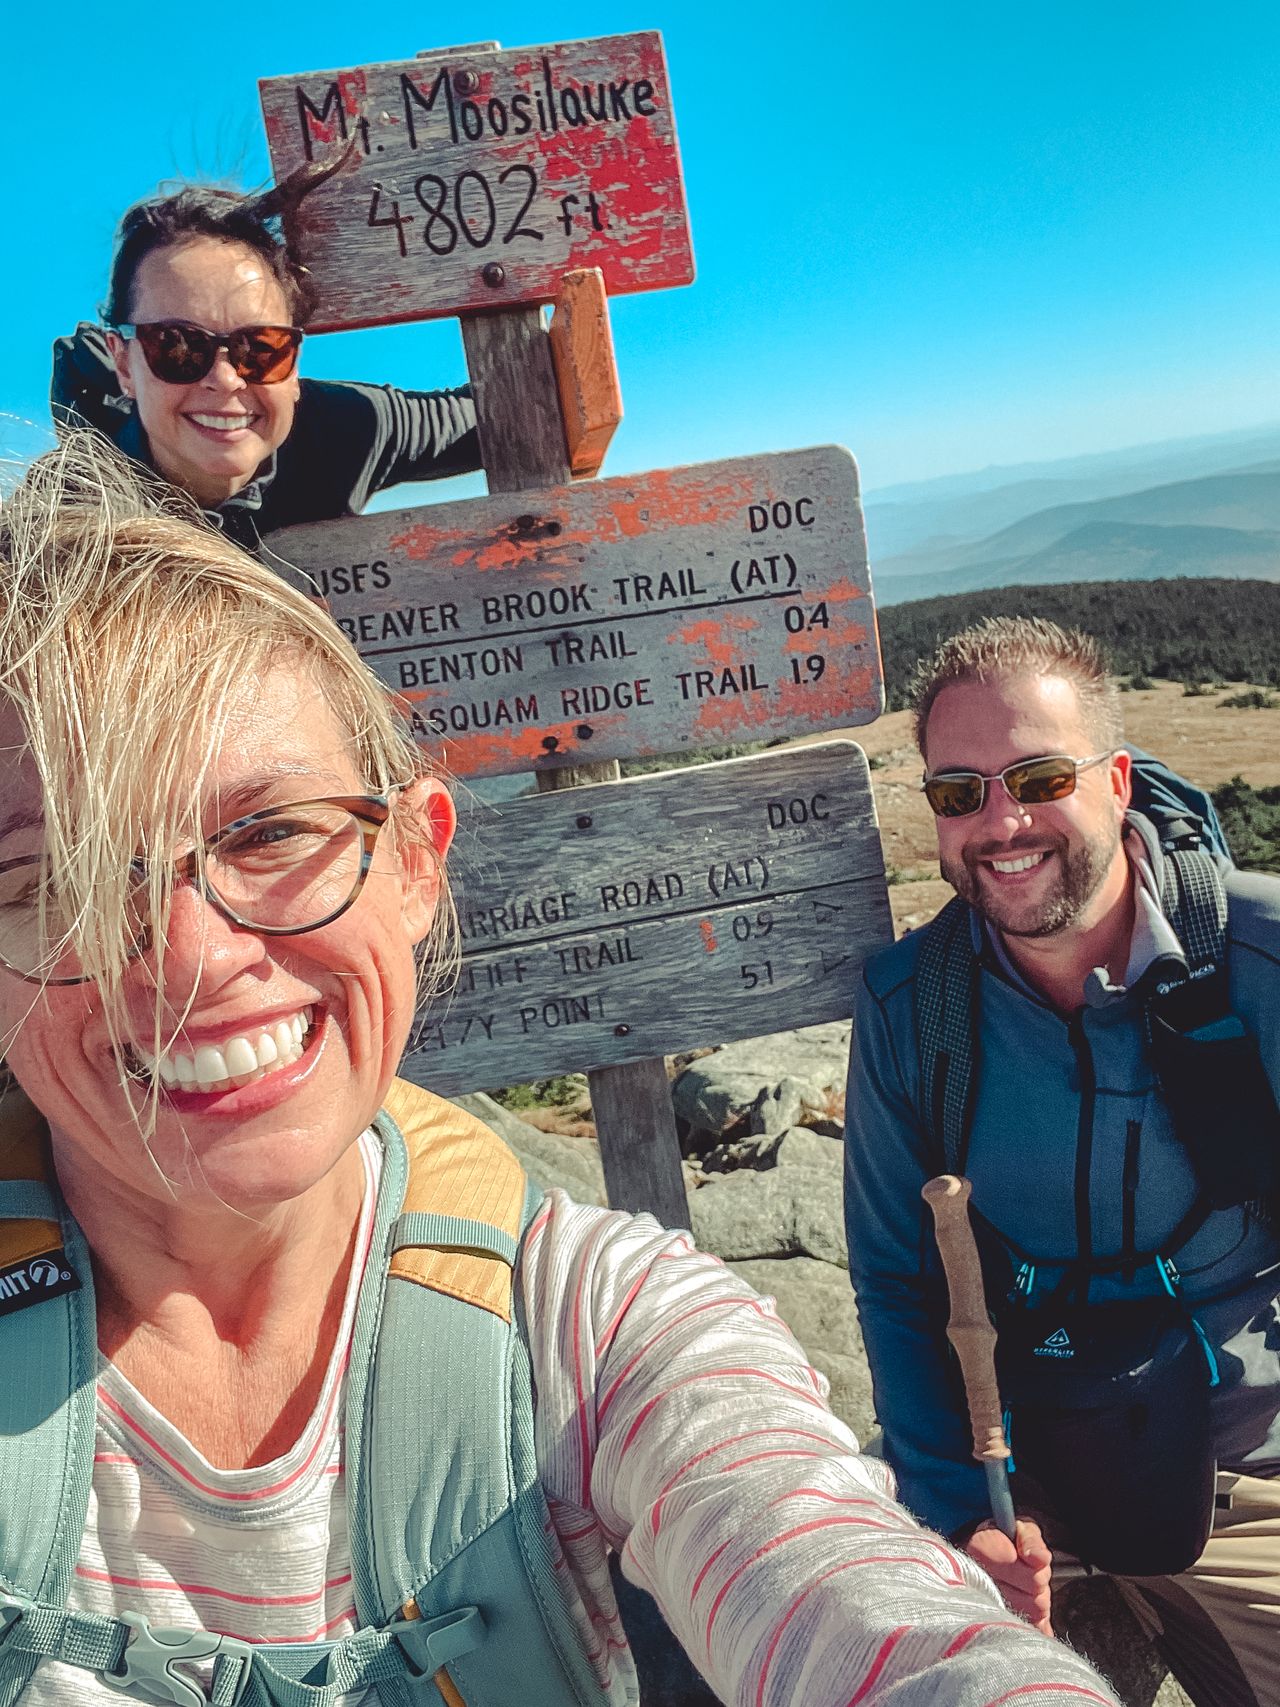 Selfie at the top of Mount Moosilauke showing Dries, Vanessa and Beth.